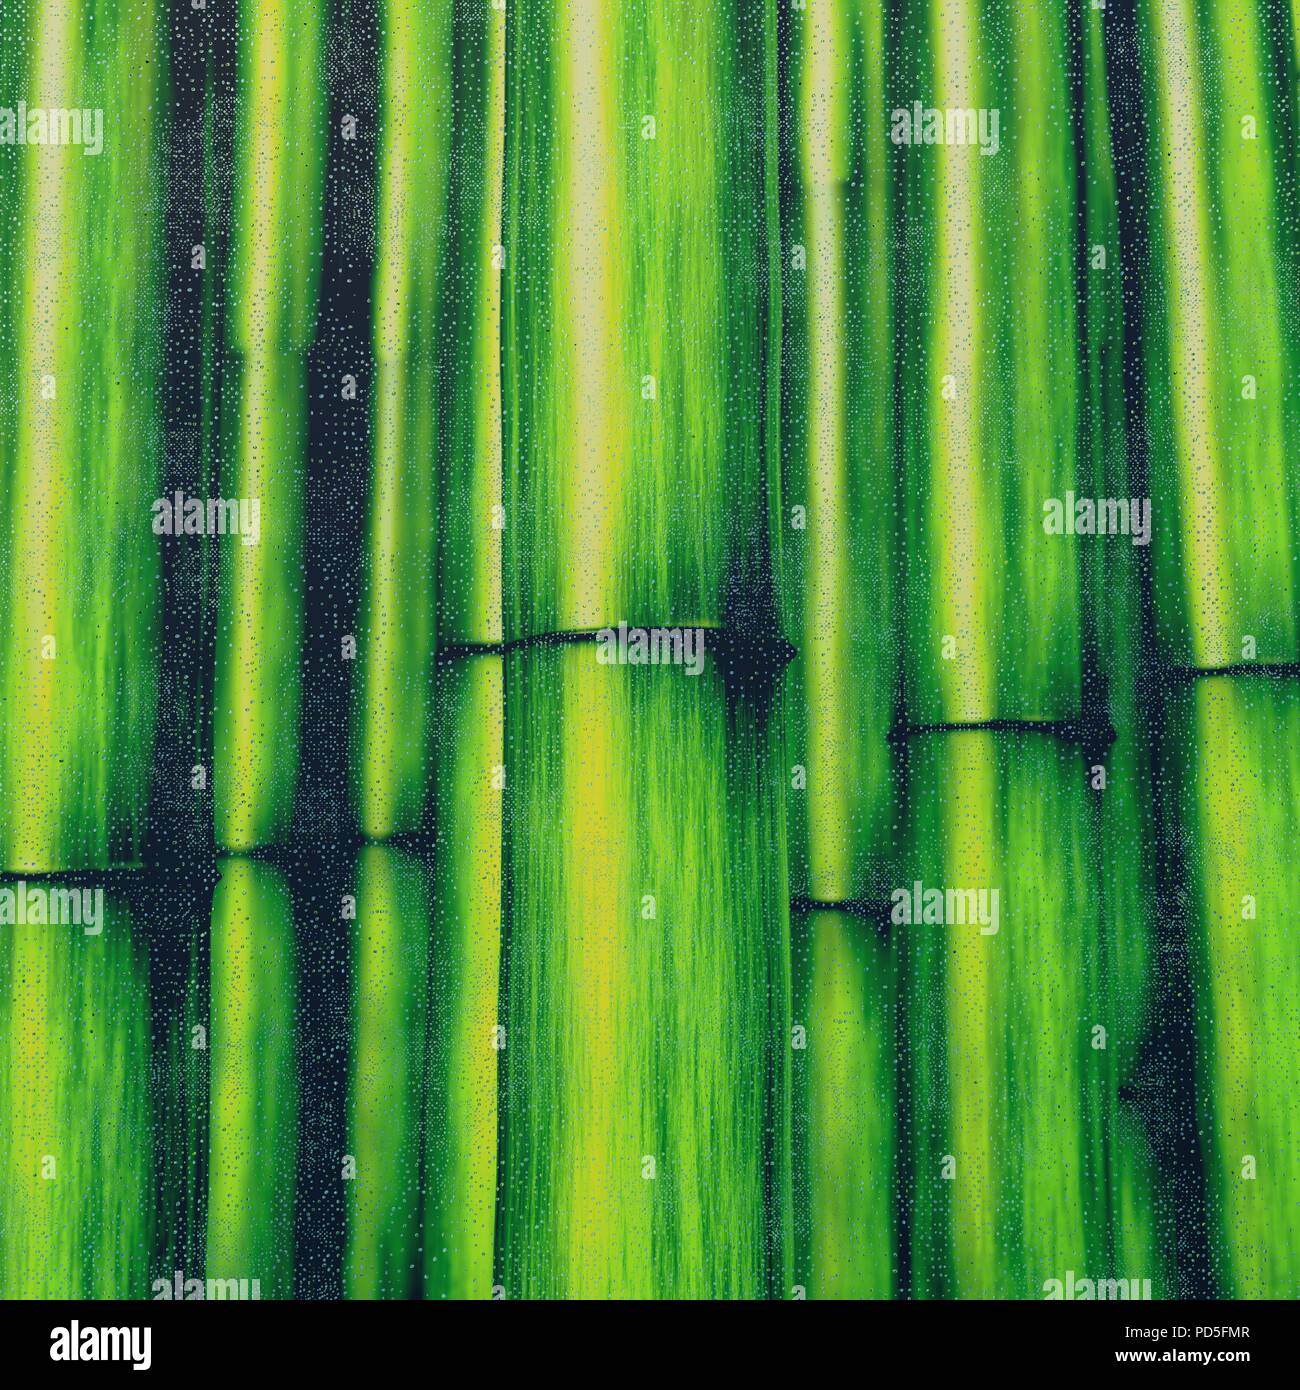 Droplets and bamboo background, 3d illustration Stock Photo